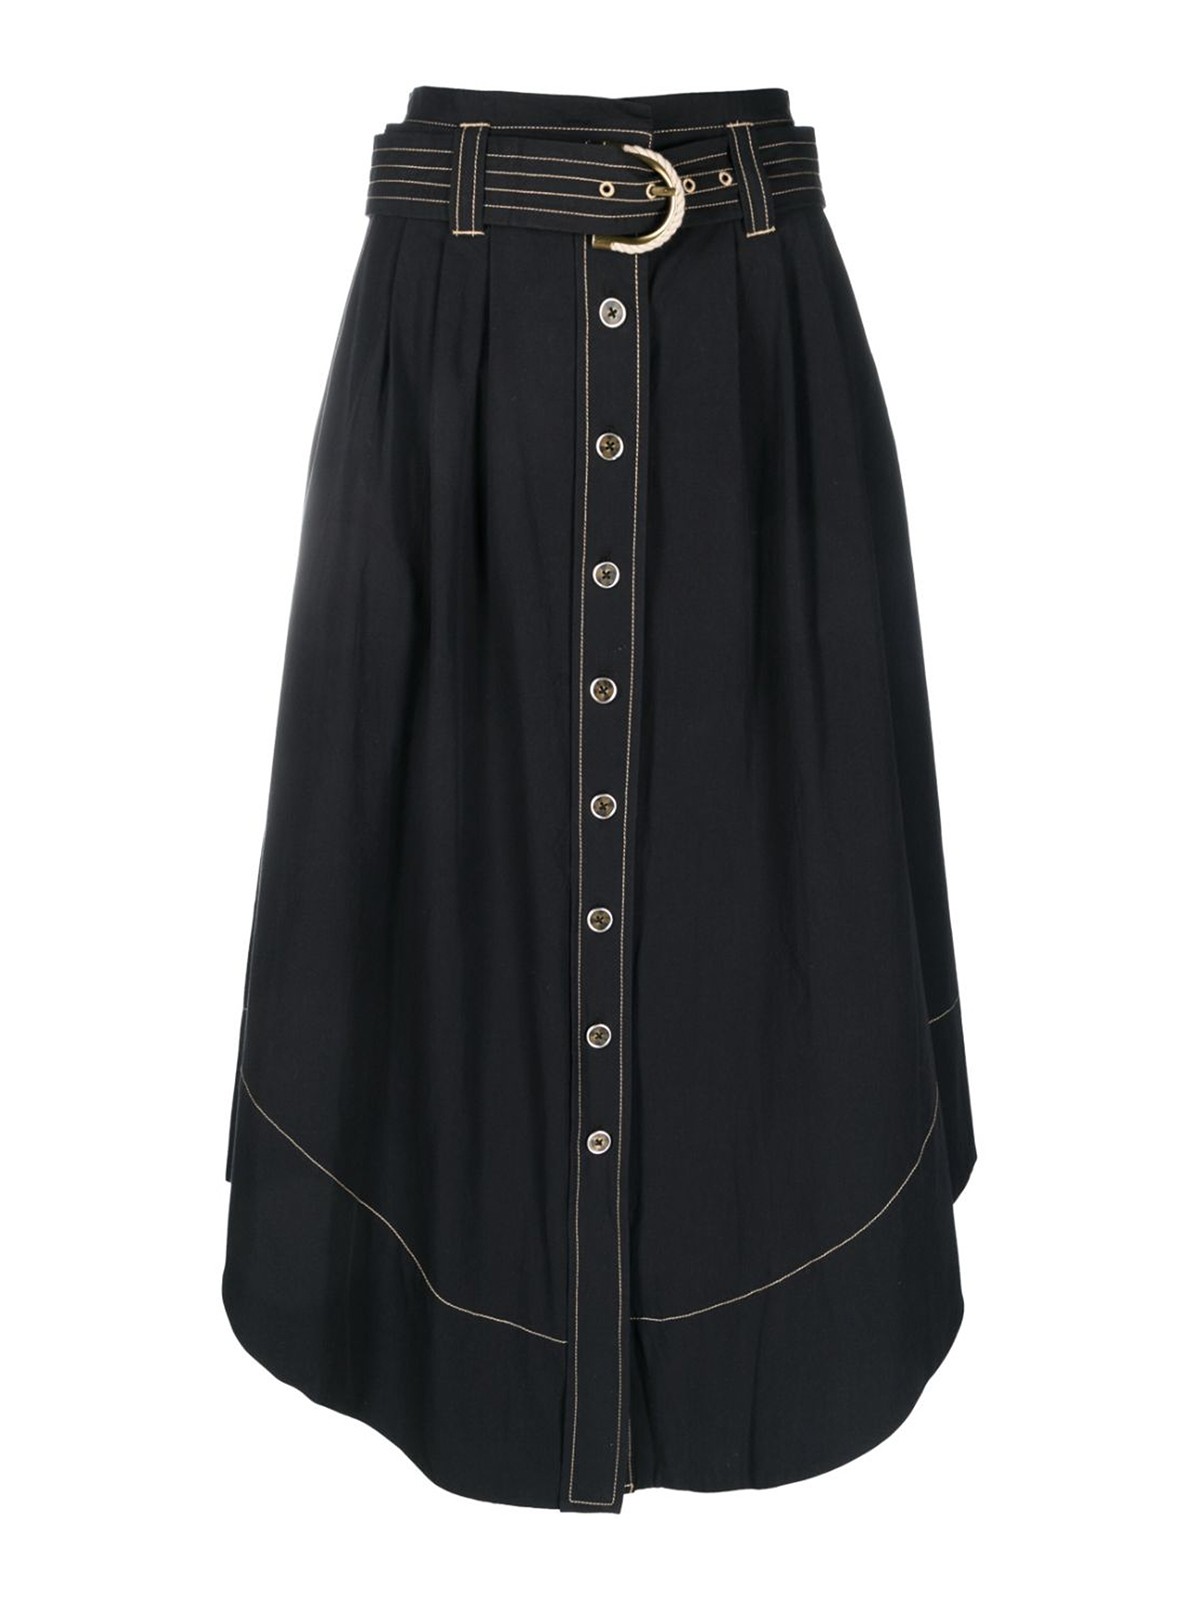 Belted skirts